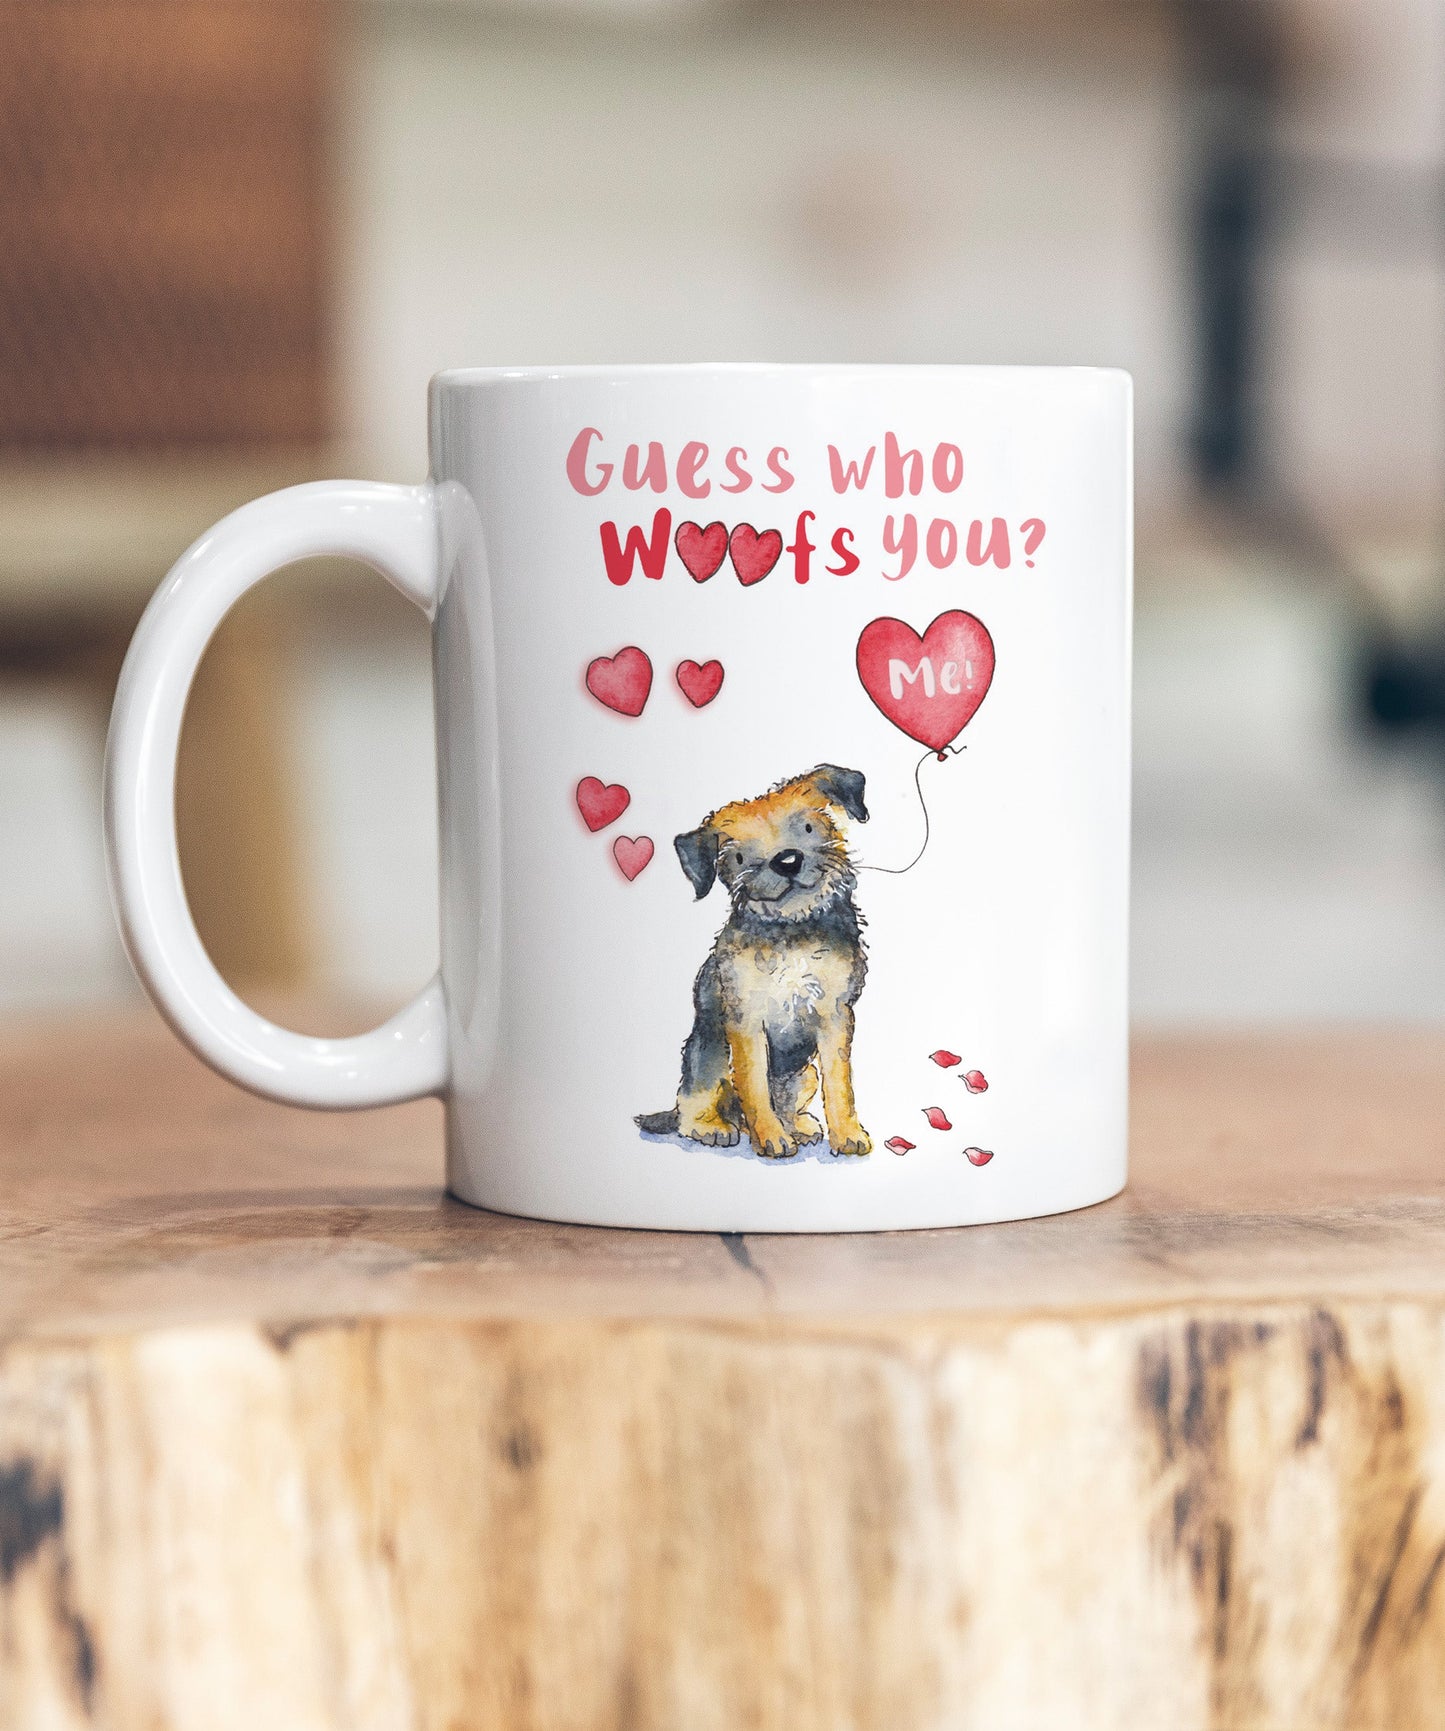 Border Terrier Guess Who Woofs You Ceramic Mug